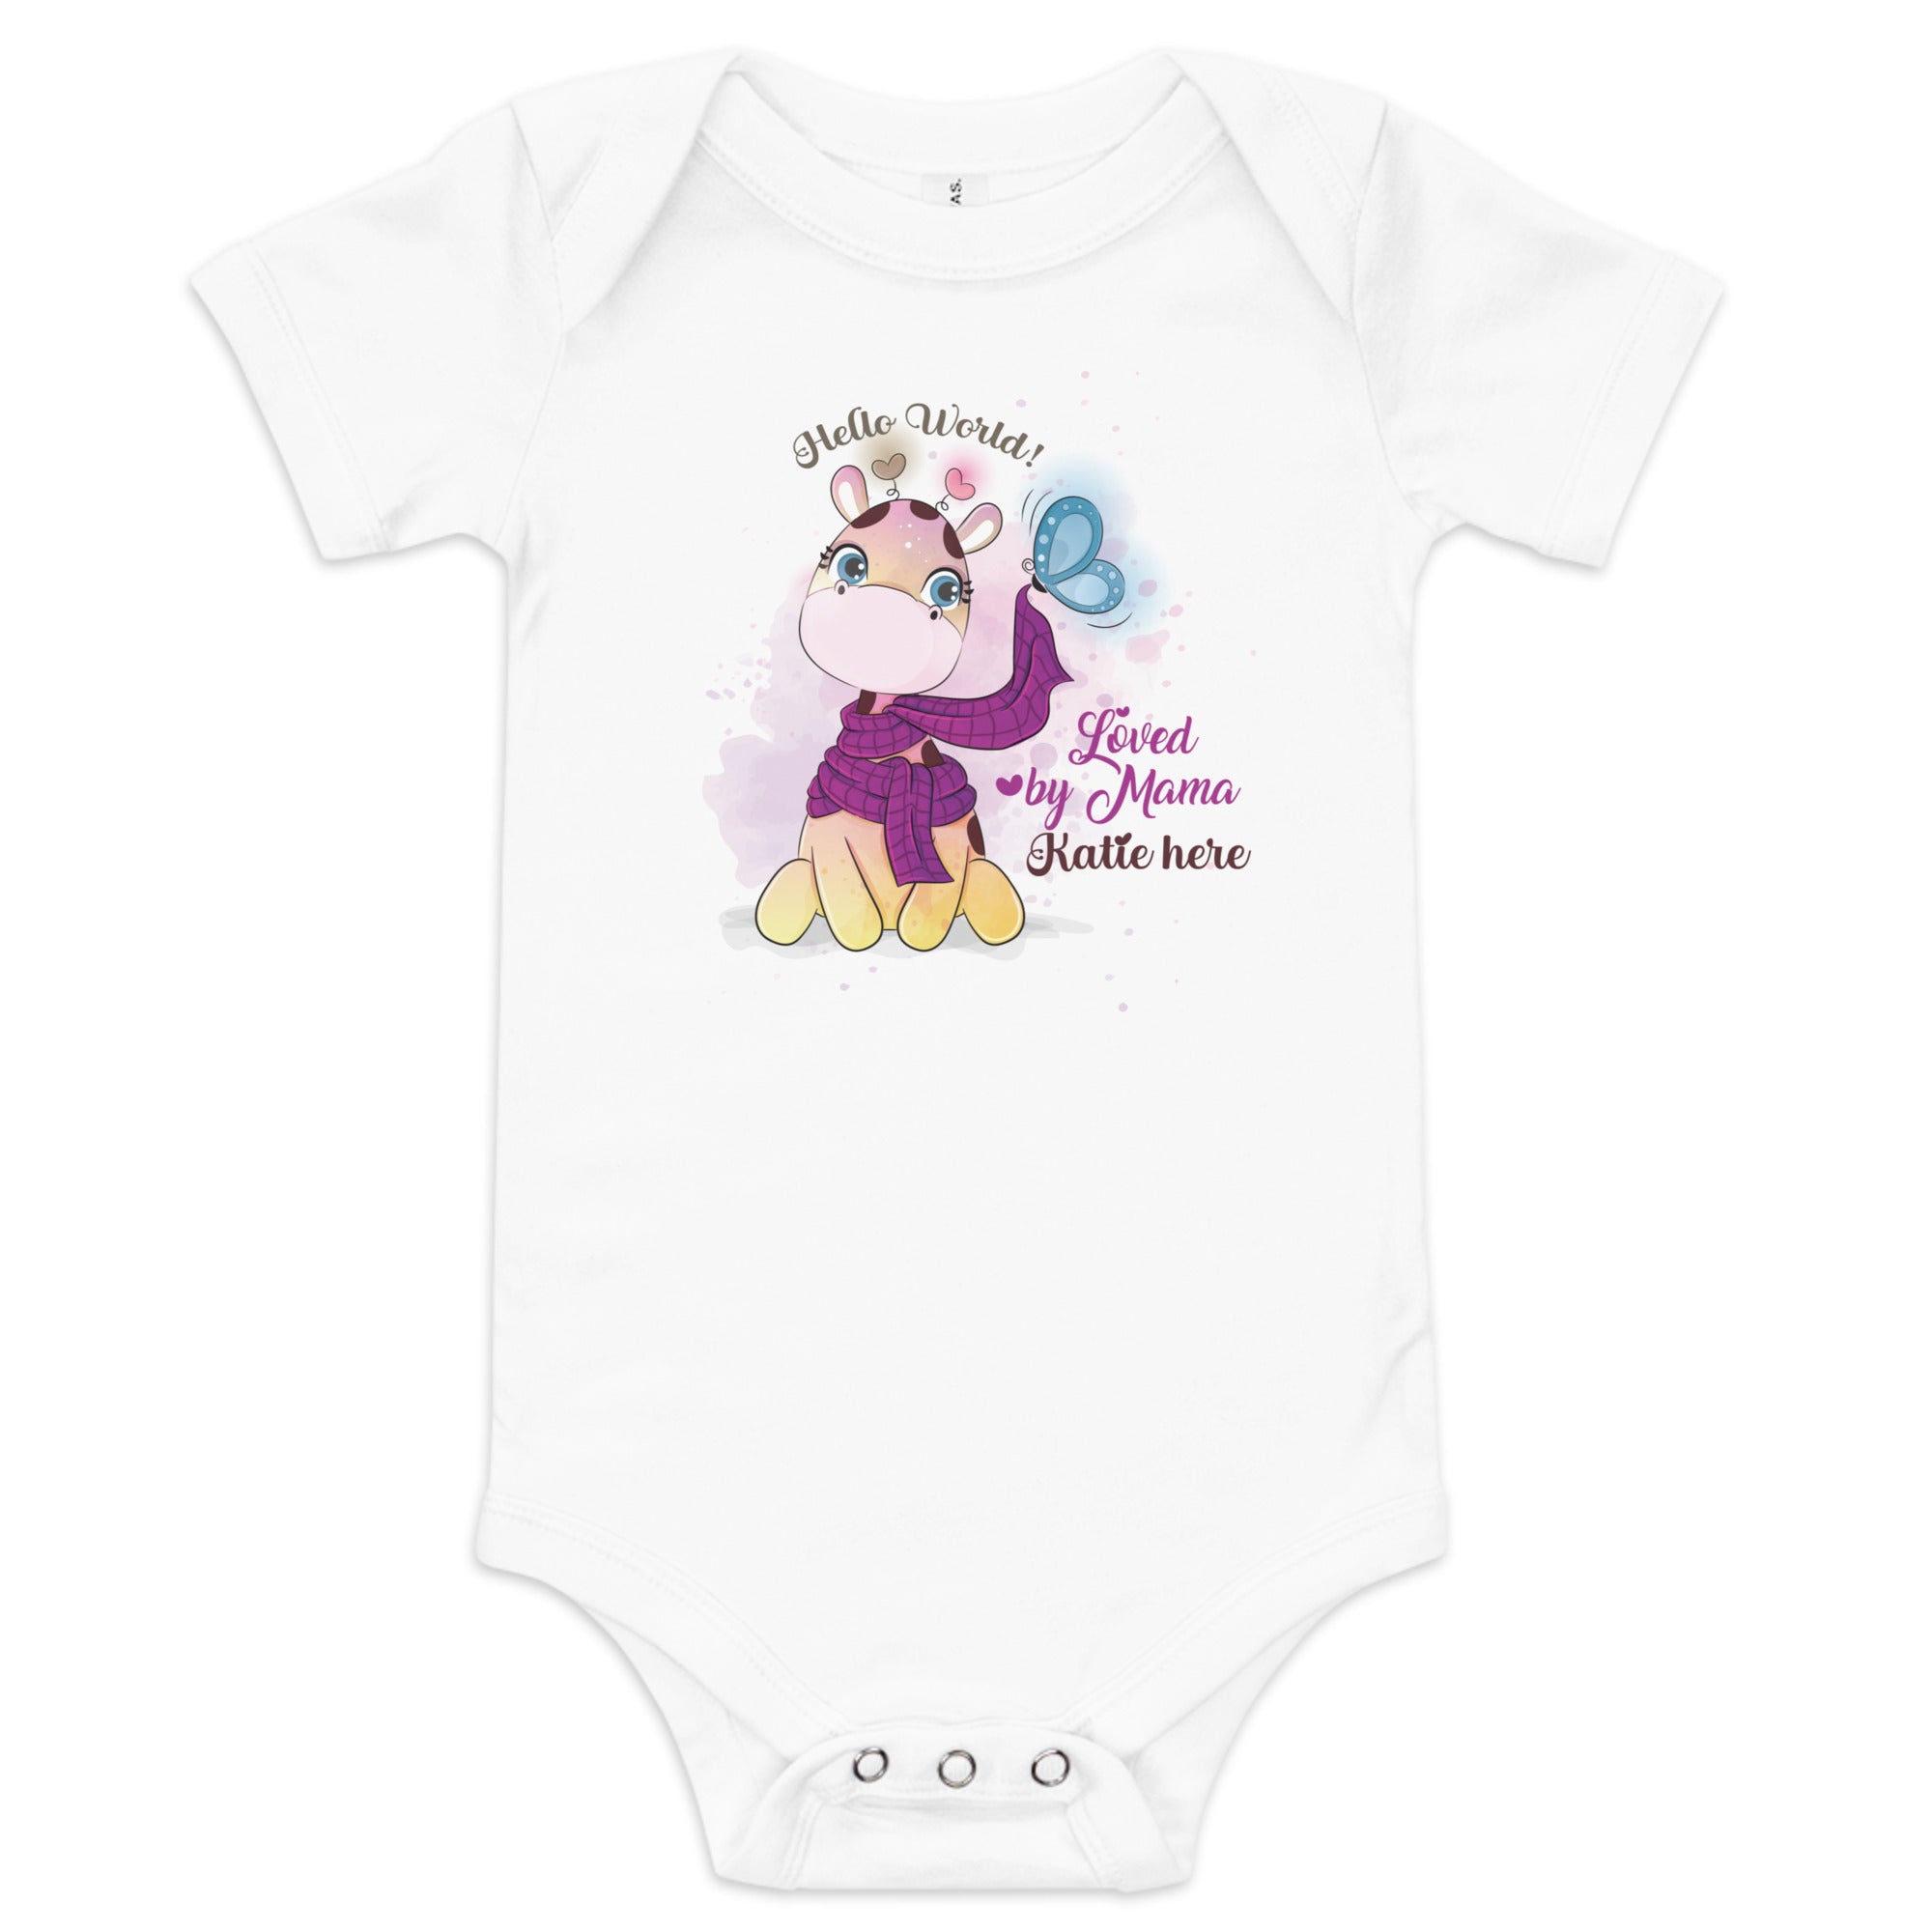 Hello World! Loved by Mama, Baby short sleeve one piece